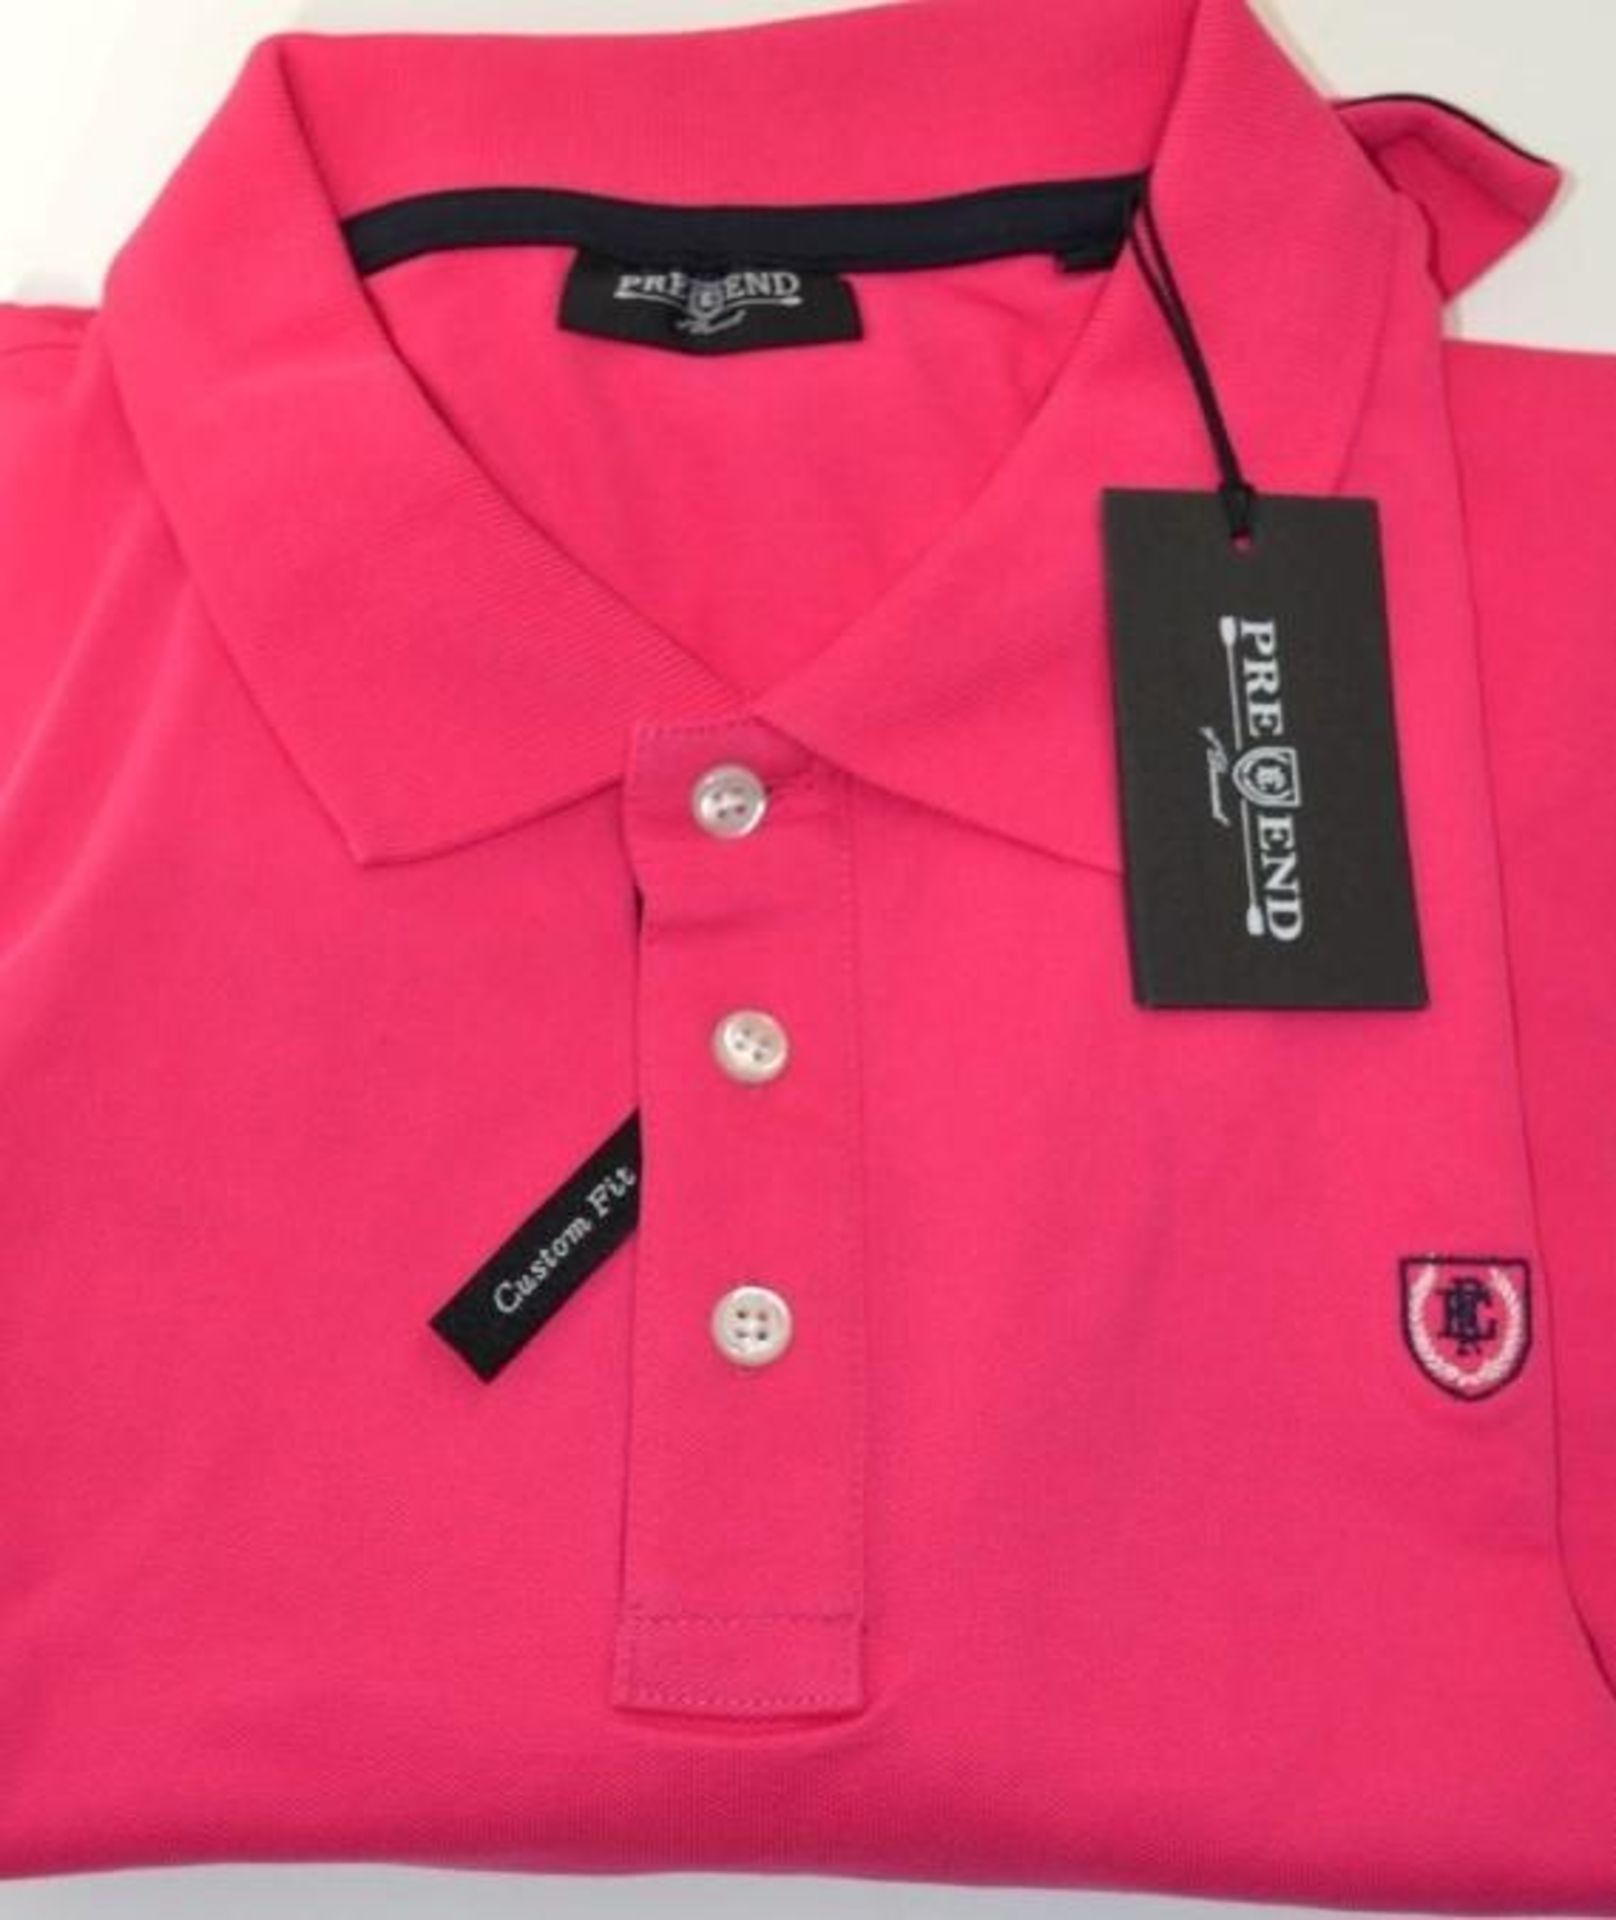 5 x Assorted Pre End Branded Mens Short Sleeve Polo Shirts - New Stock With Tags - Recent Retail - Image 5 of 6